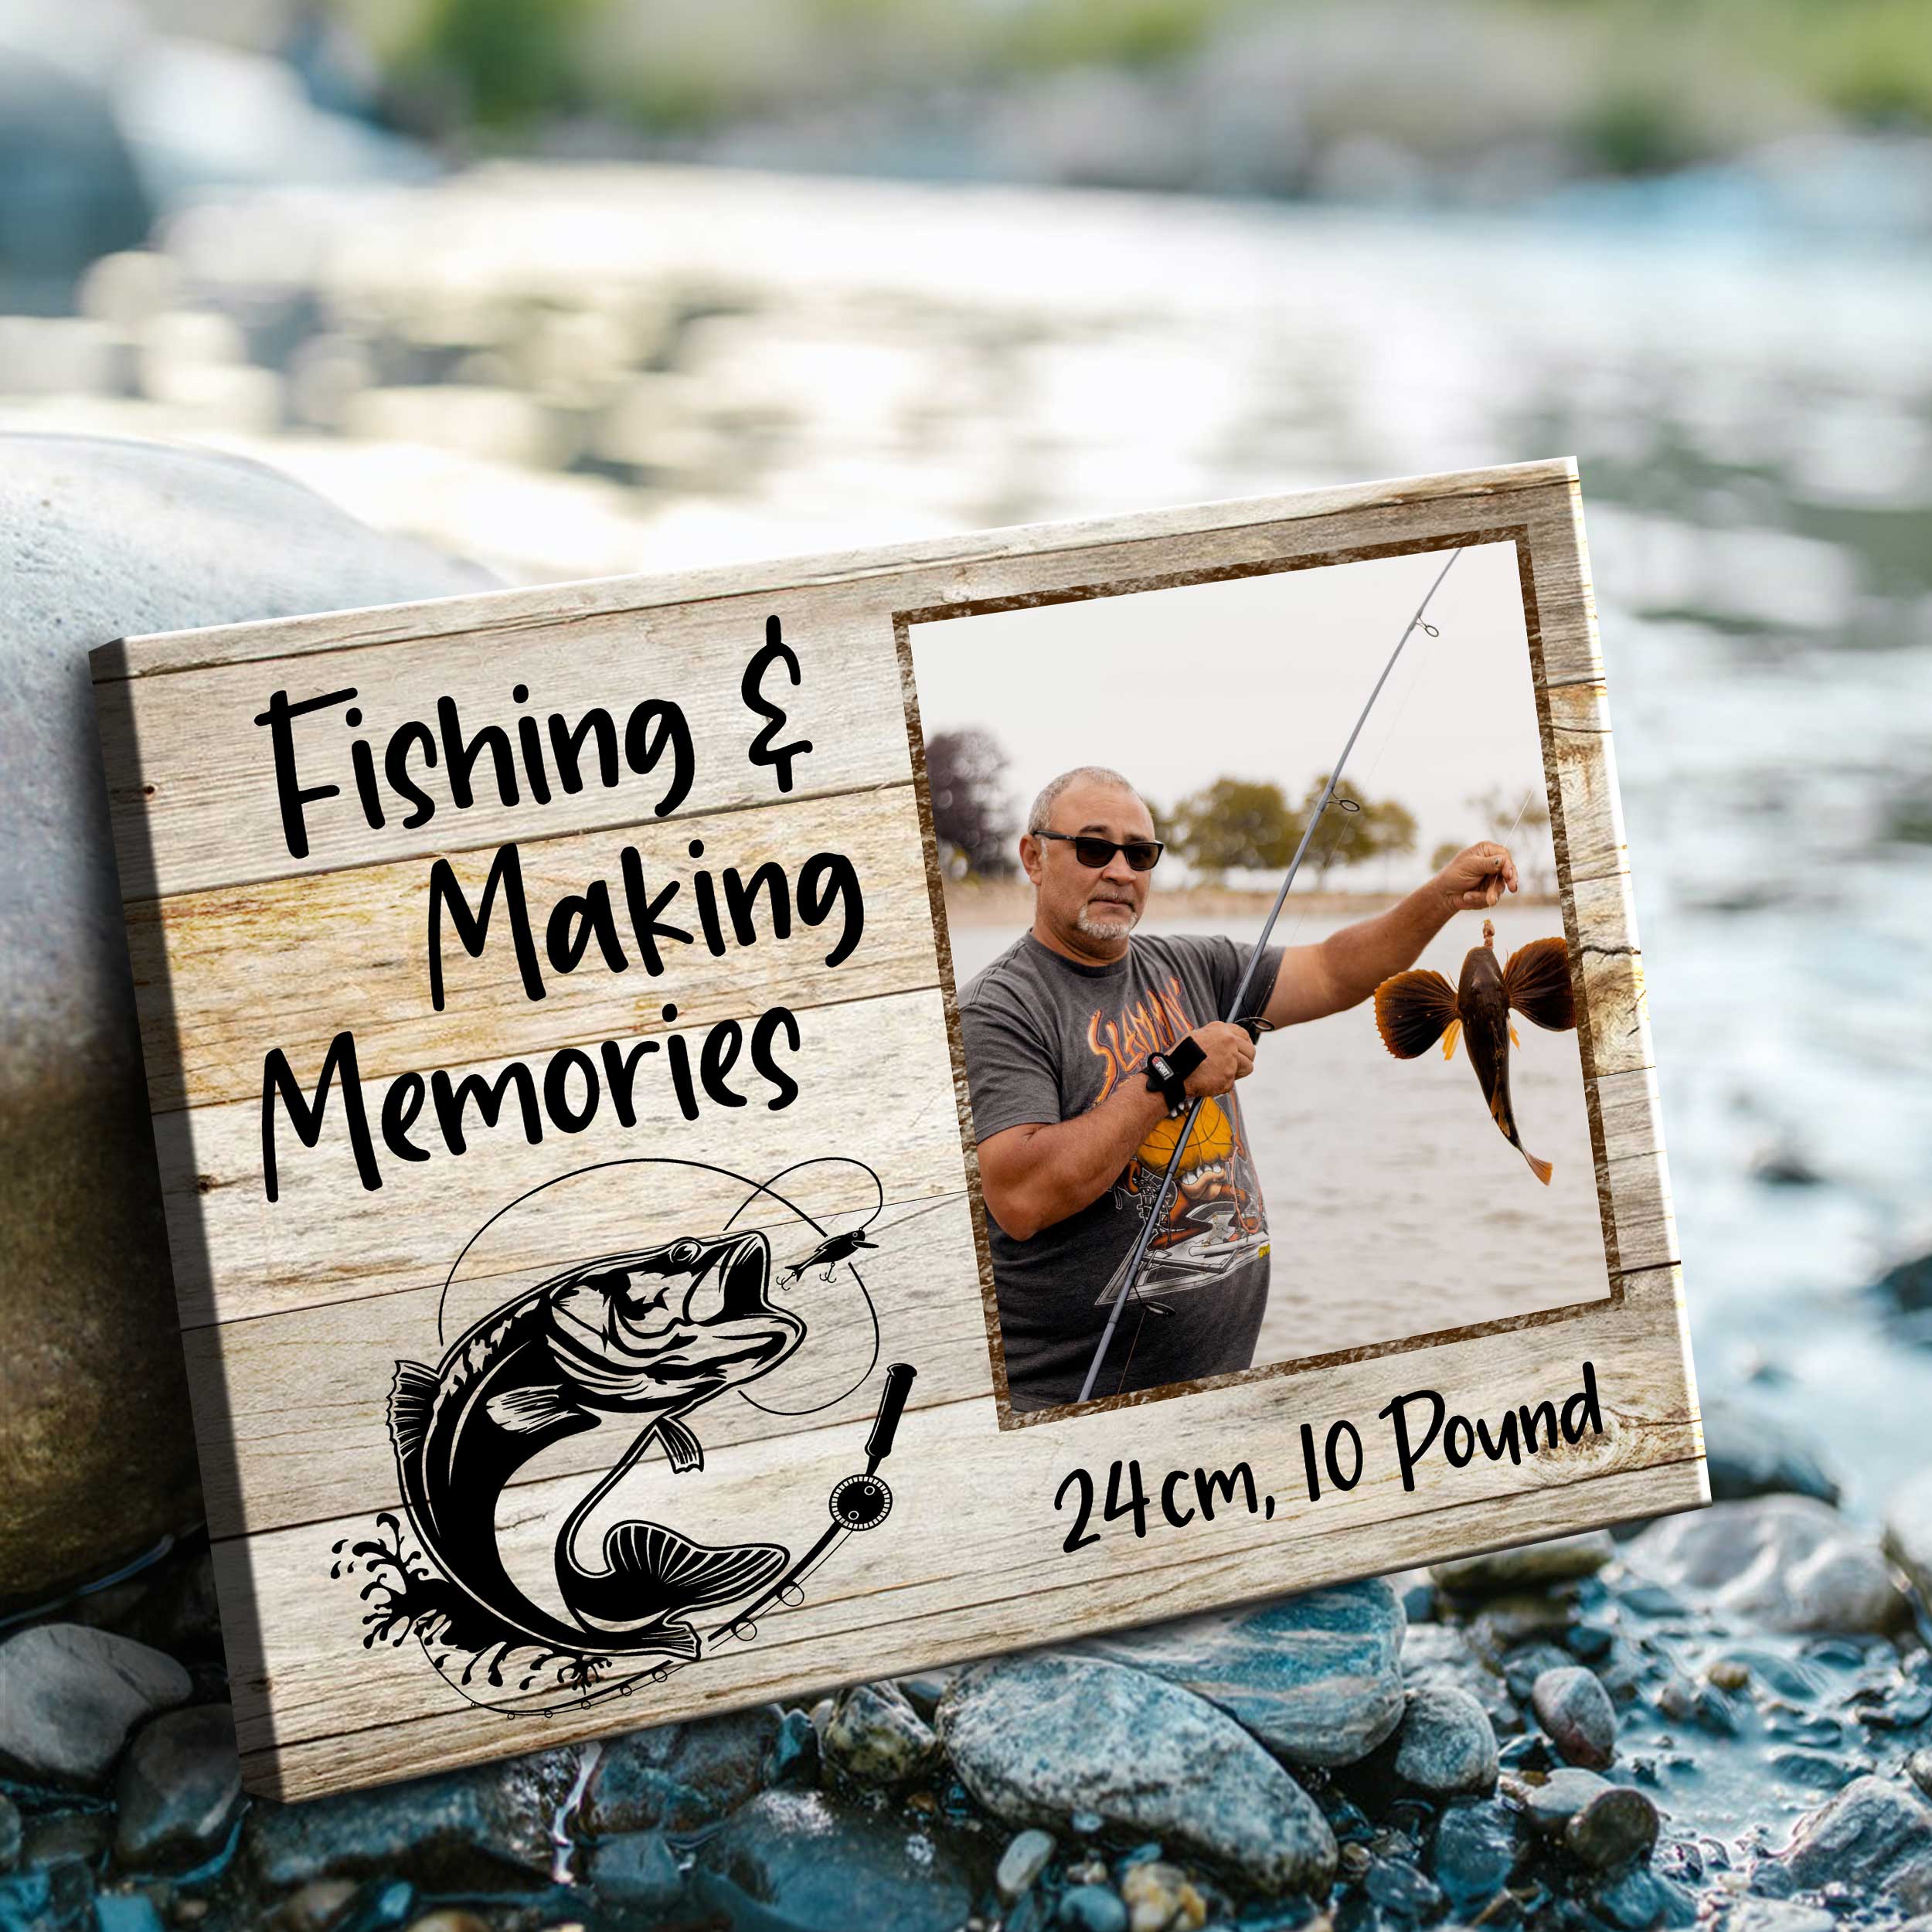 Custom Best Gifts For Fisherman, Fishing Gifts For Dad, Man Cave Wall Decor,  Fishing Gift Ideas